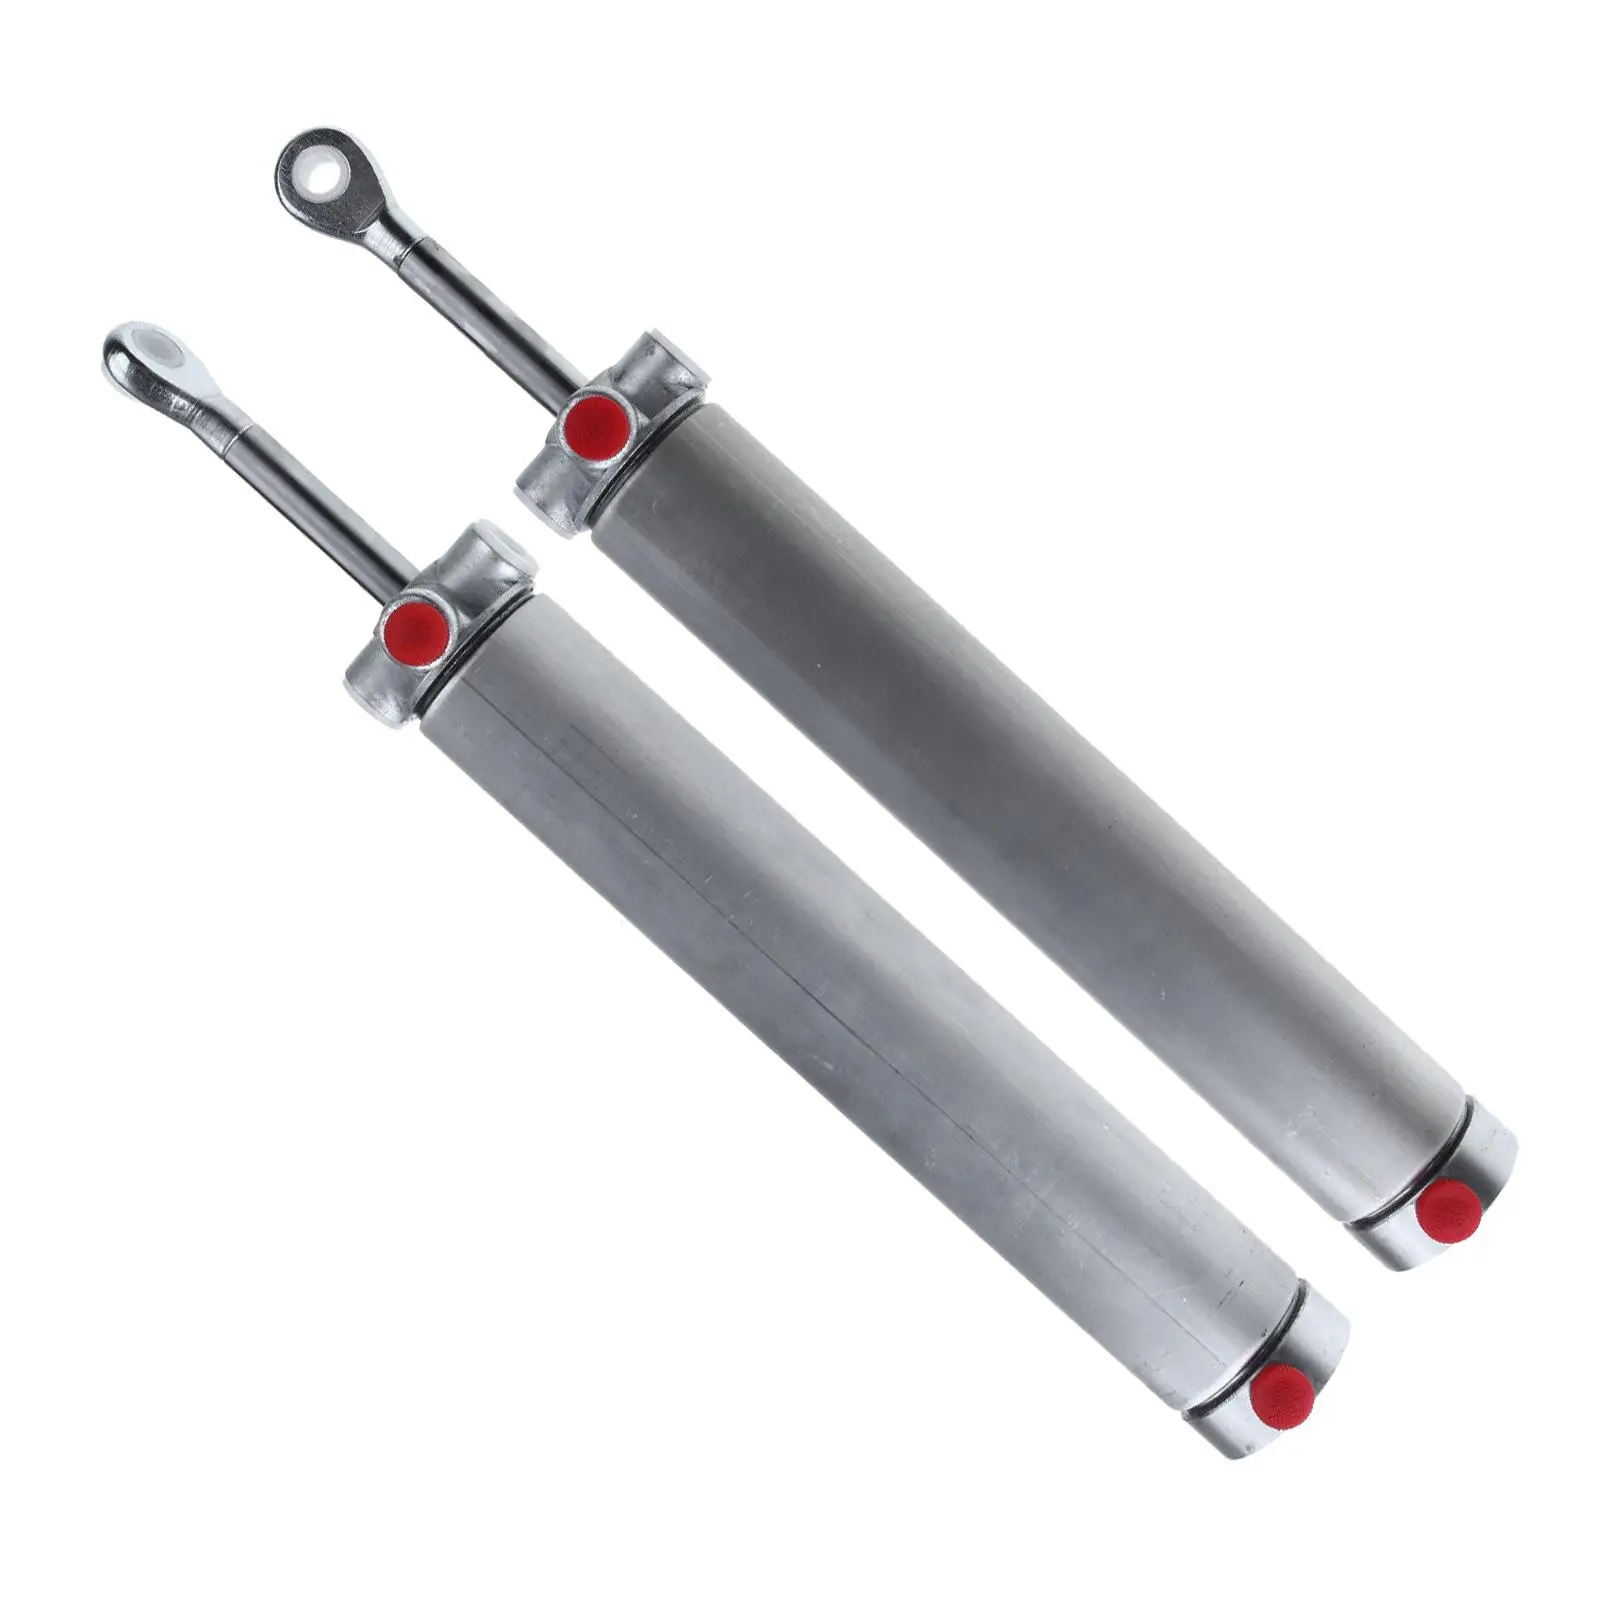 Automotive Convertible Top Hydraulic Cylinders for Ford Mustang ,One for Driver Side and One for Passenger Side Replacement